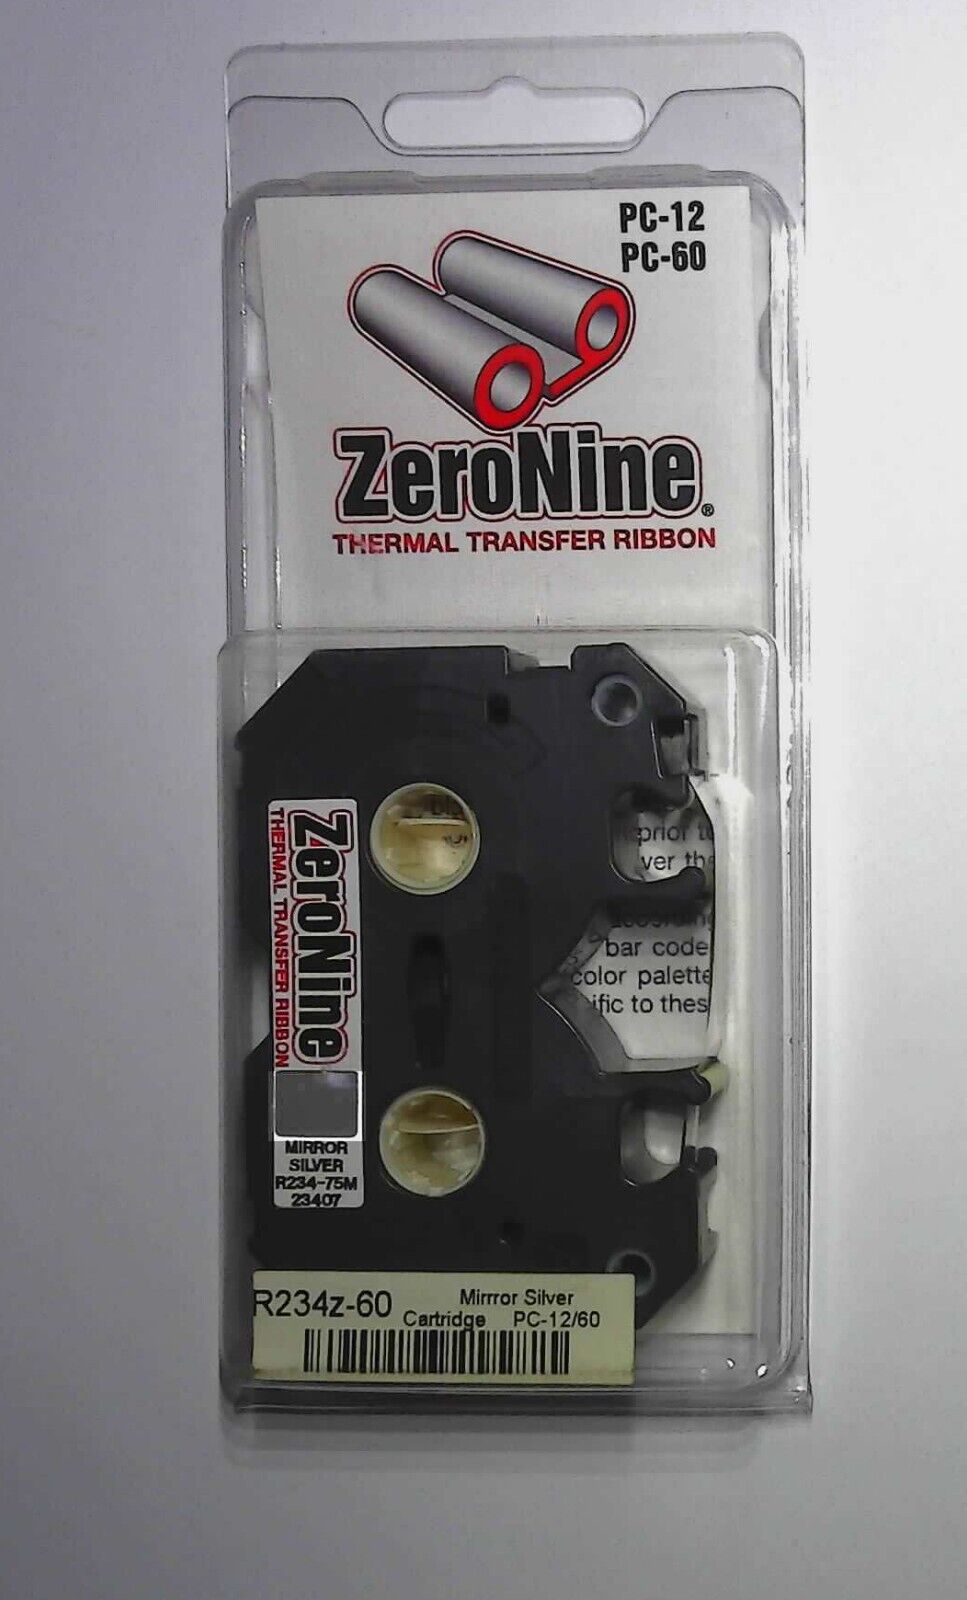 Roland Colorcamm PC-12, PC-60 and PC-600 BRAND NEW ZERO NINE REPLACEMENT RIBBON